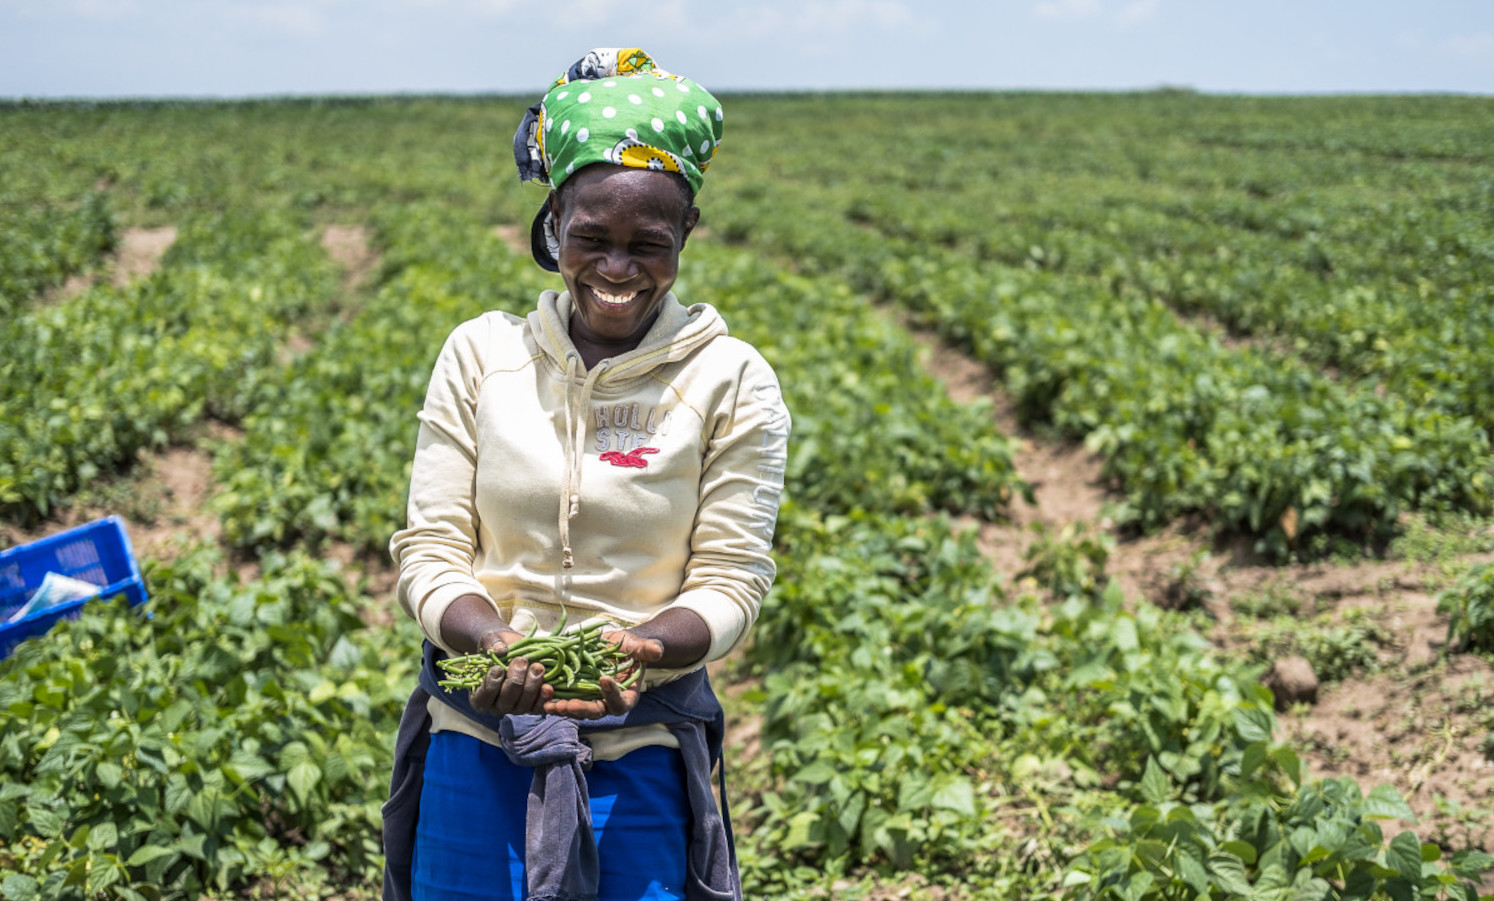 Farmer cultivates green beans, which can help tackle the hunger and climate crises, in Kenya